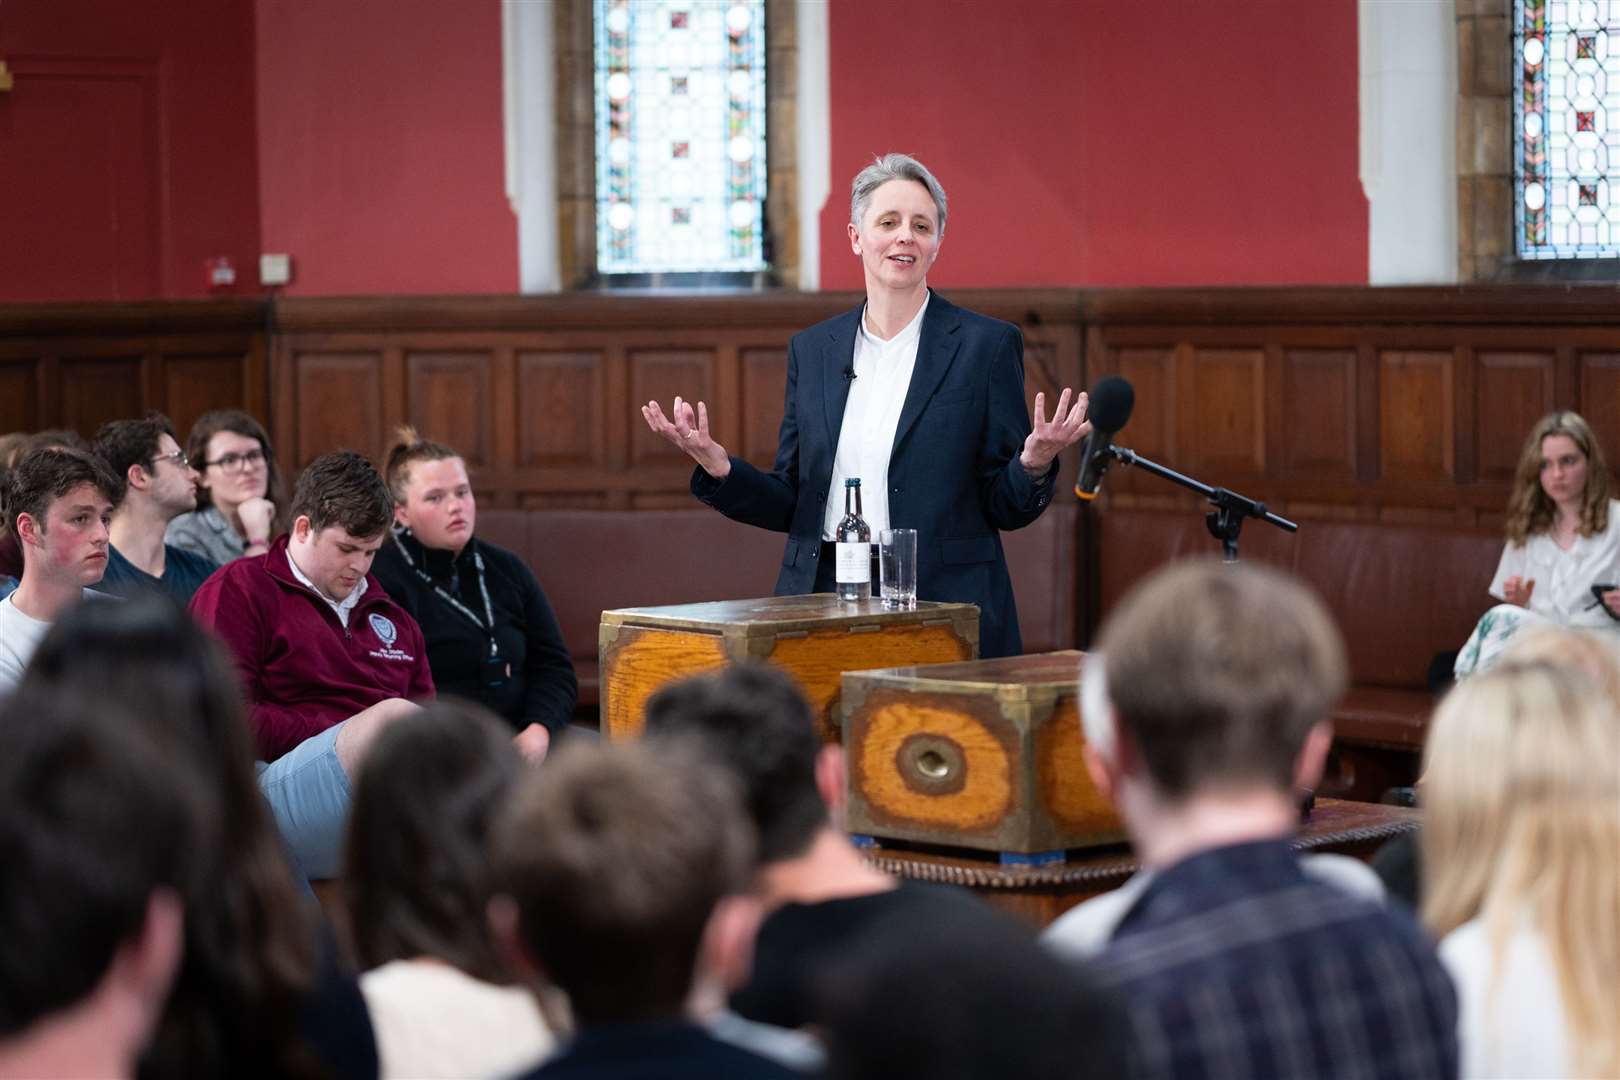 Professor Kathleen Stock speaking at the Oxford Union before LGBT+ activists stormed the talk (Oxford Union Society/PA)